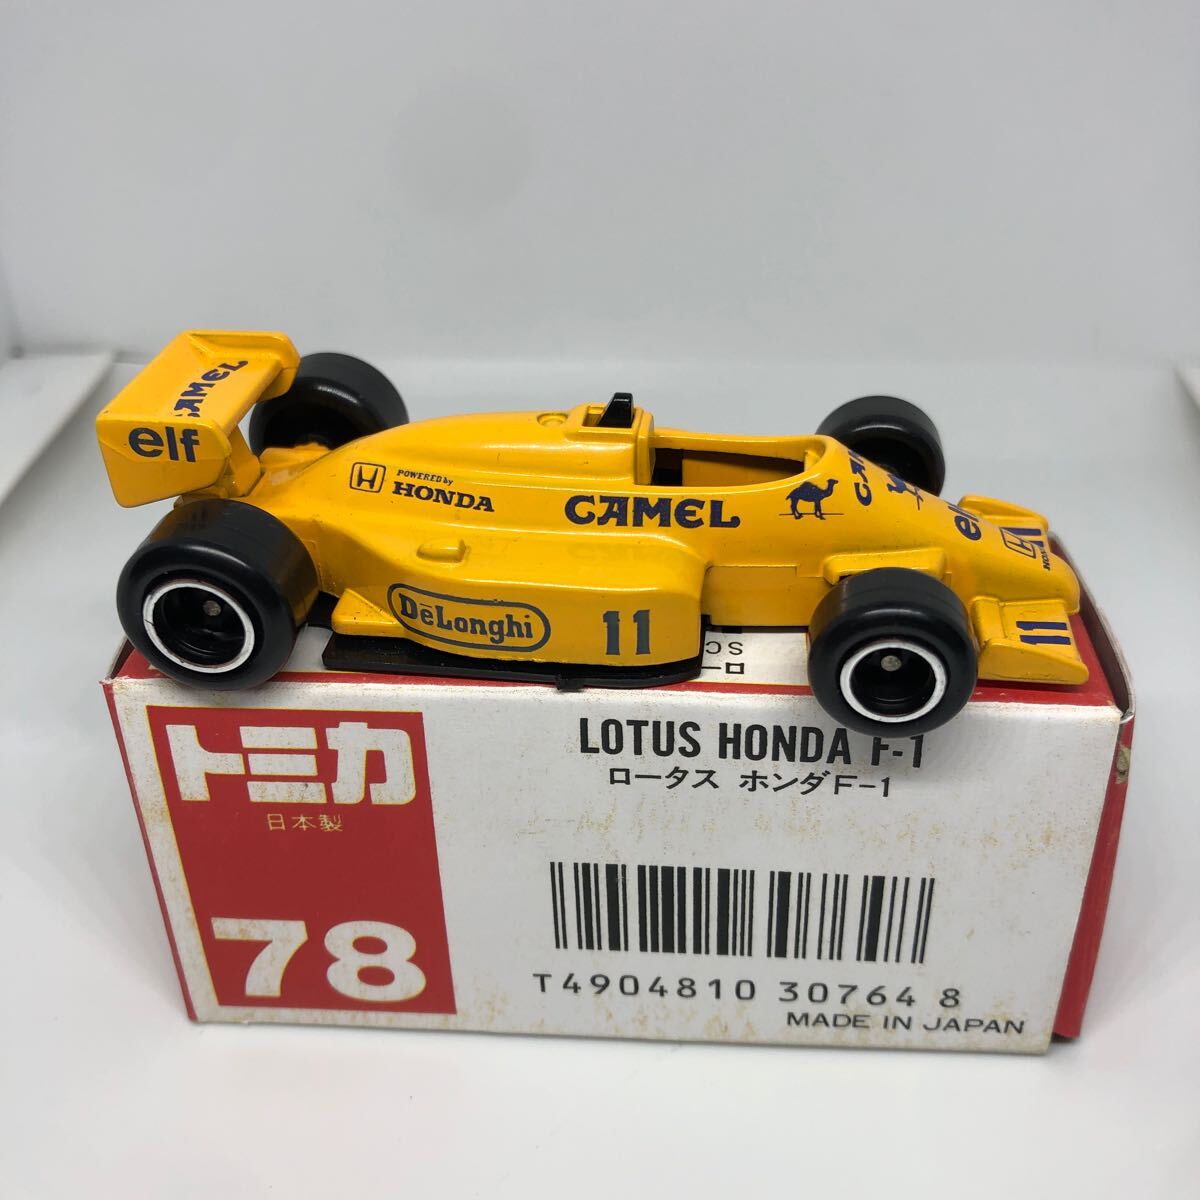  Tomica made in Japan red box 78 Lotus Honda F1 that time thing out of print 